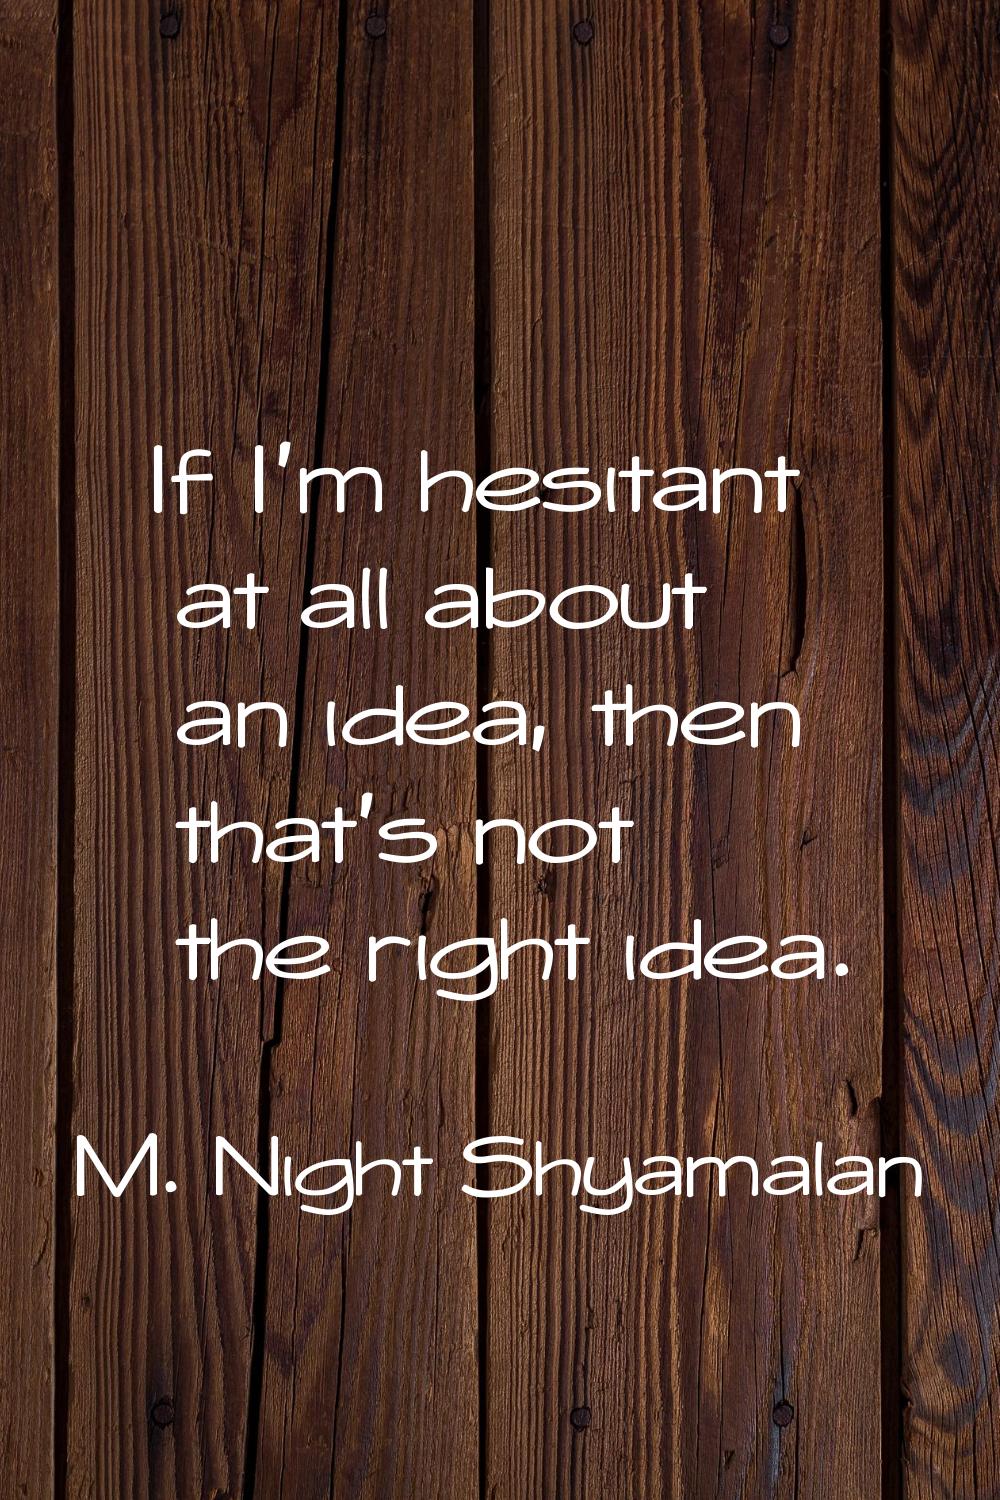 If I'm hesitant at all about an idea, then that's not the right idea.